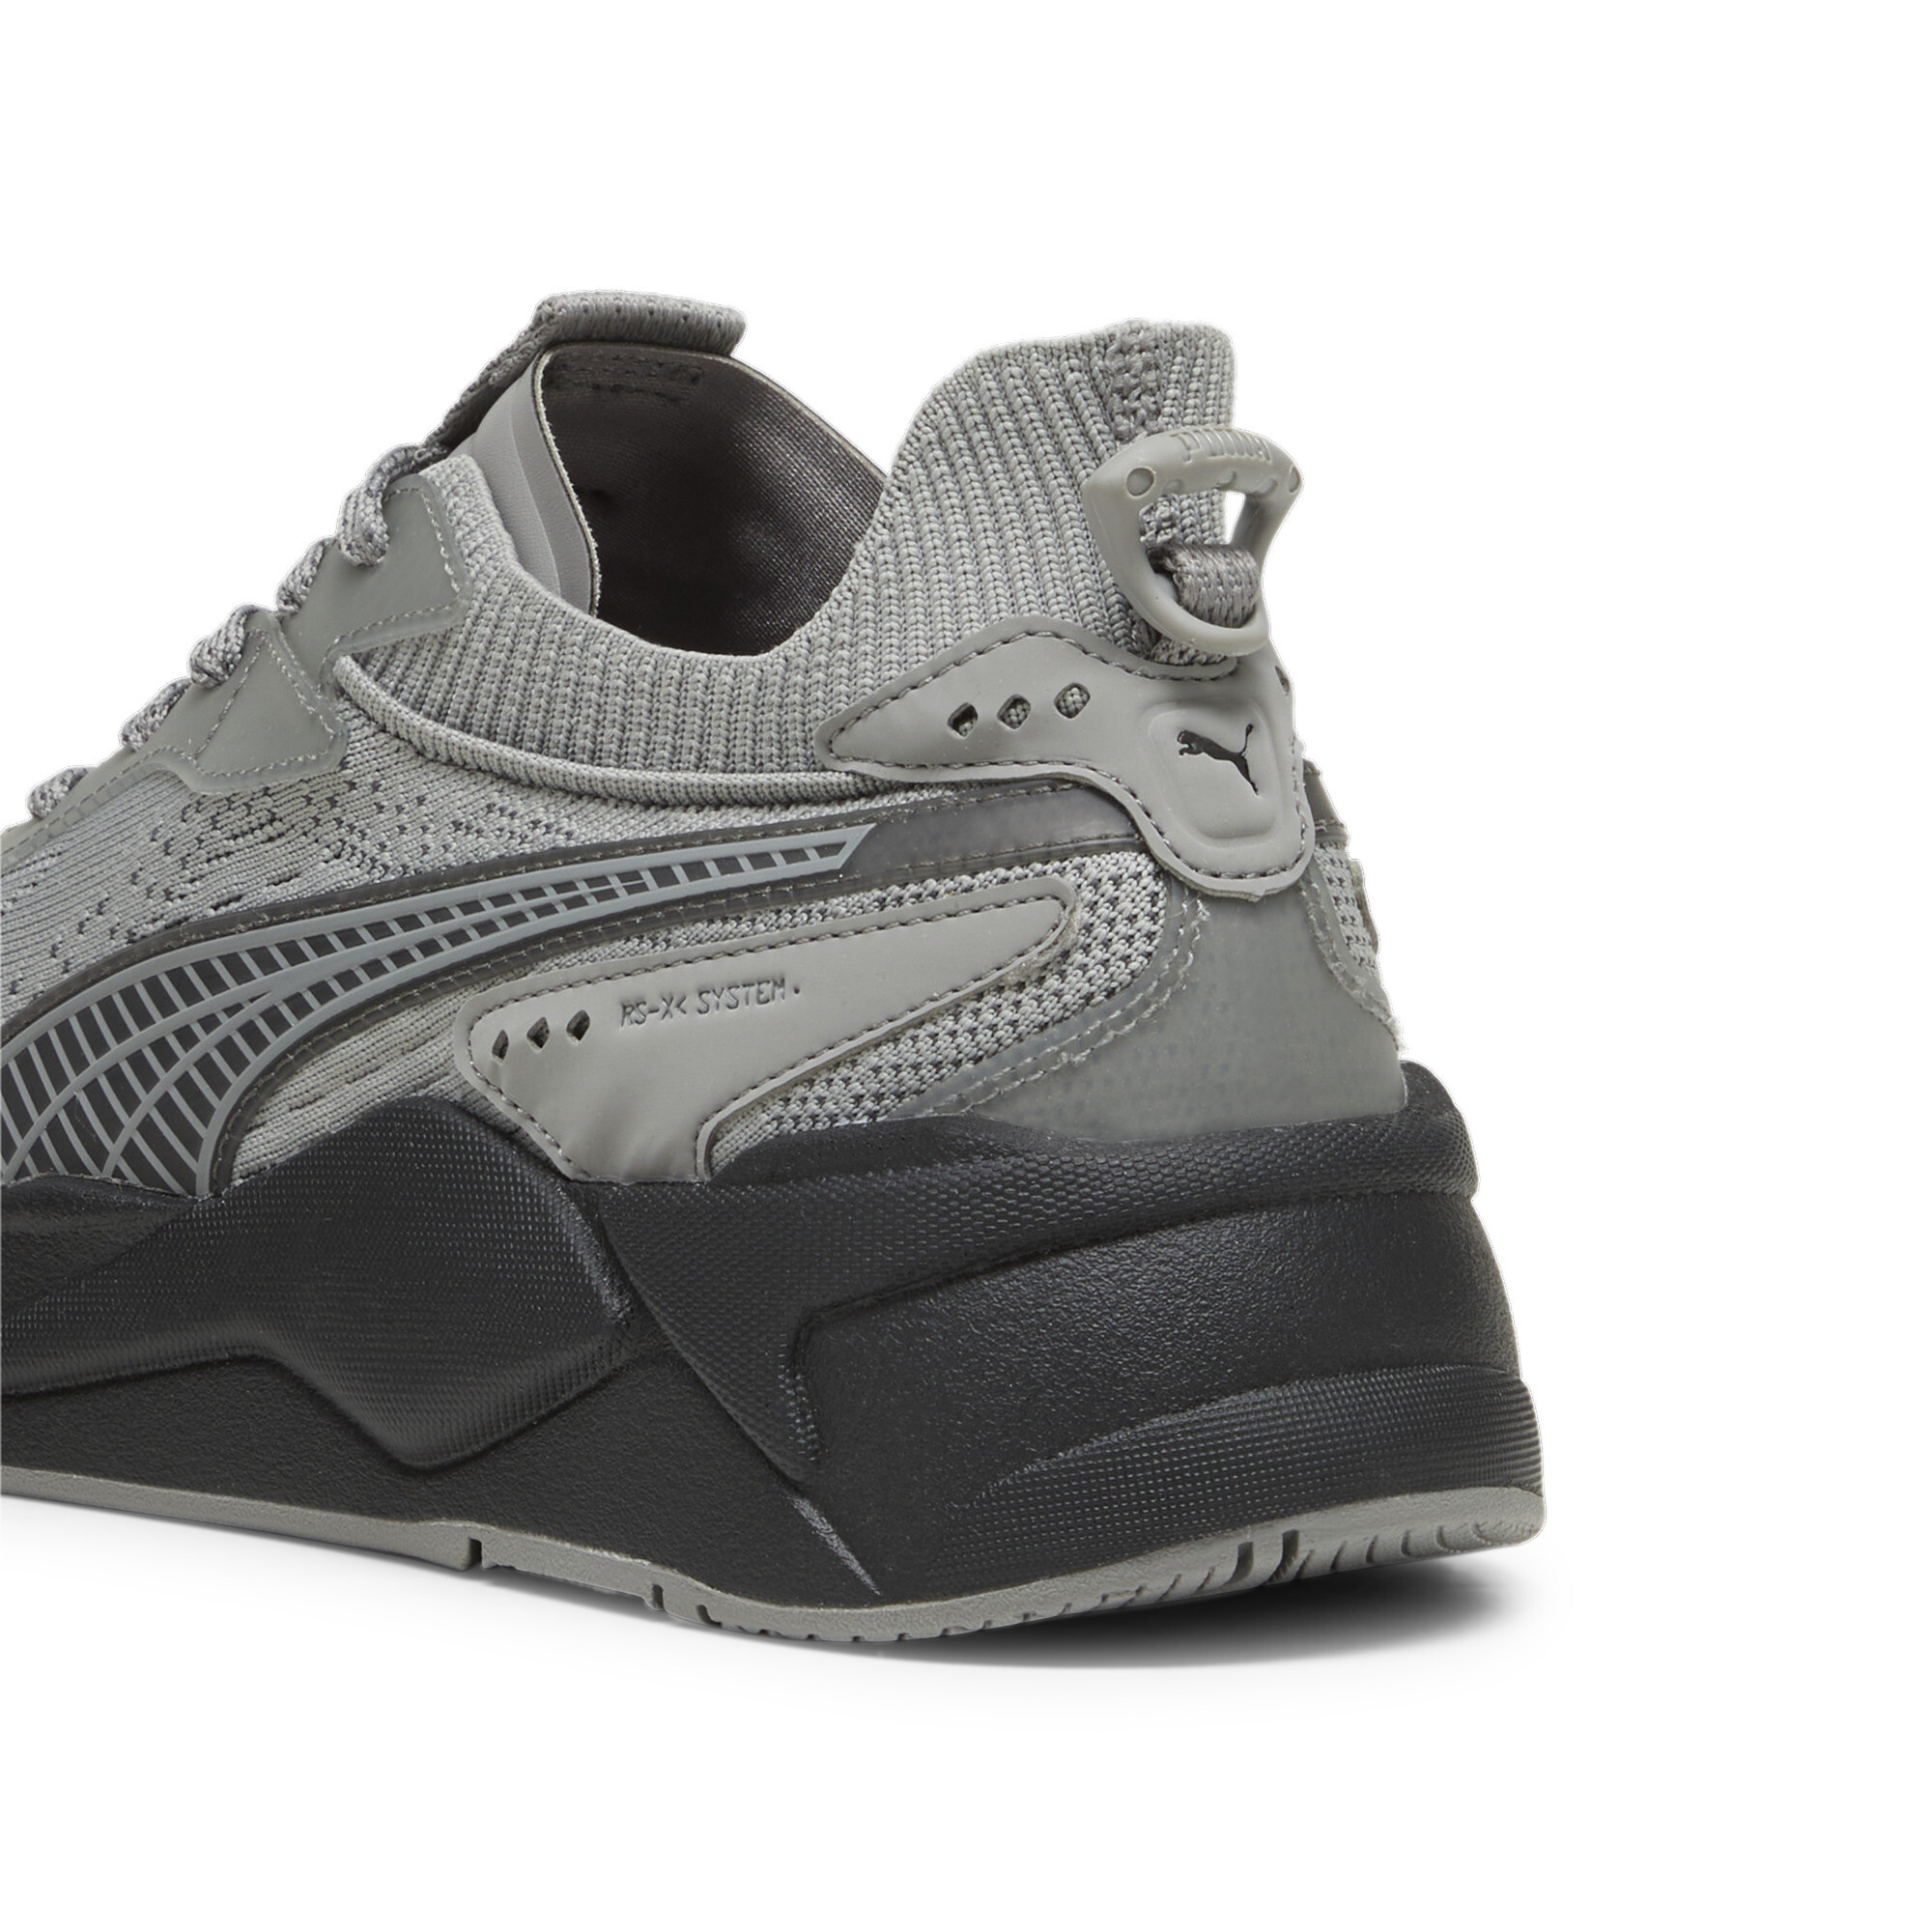 Puma RS-XK REMIX Sneakers, Gray, Size 38, Shoes